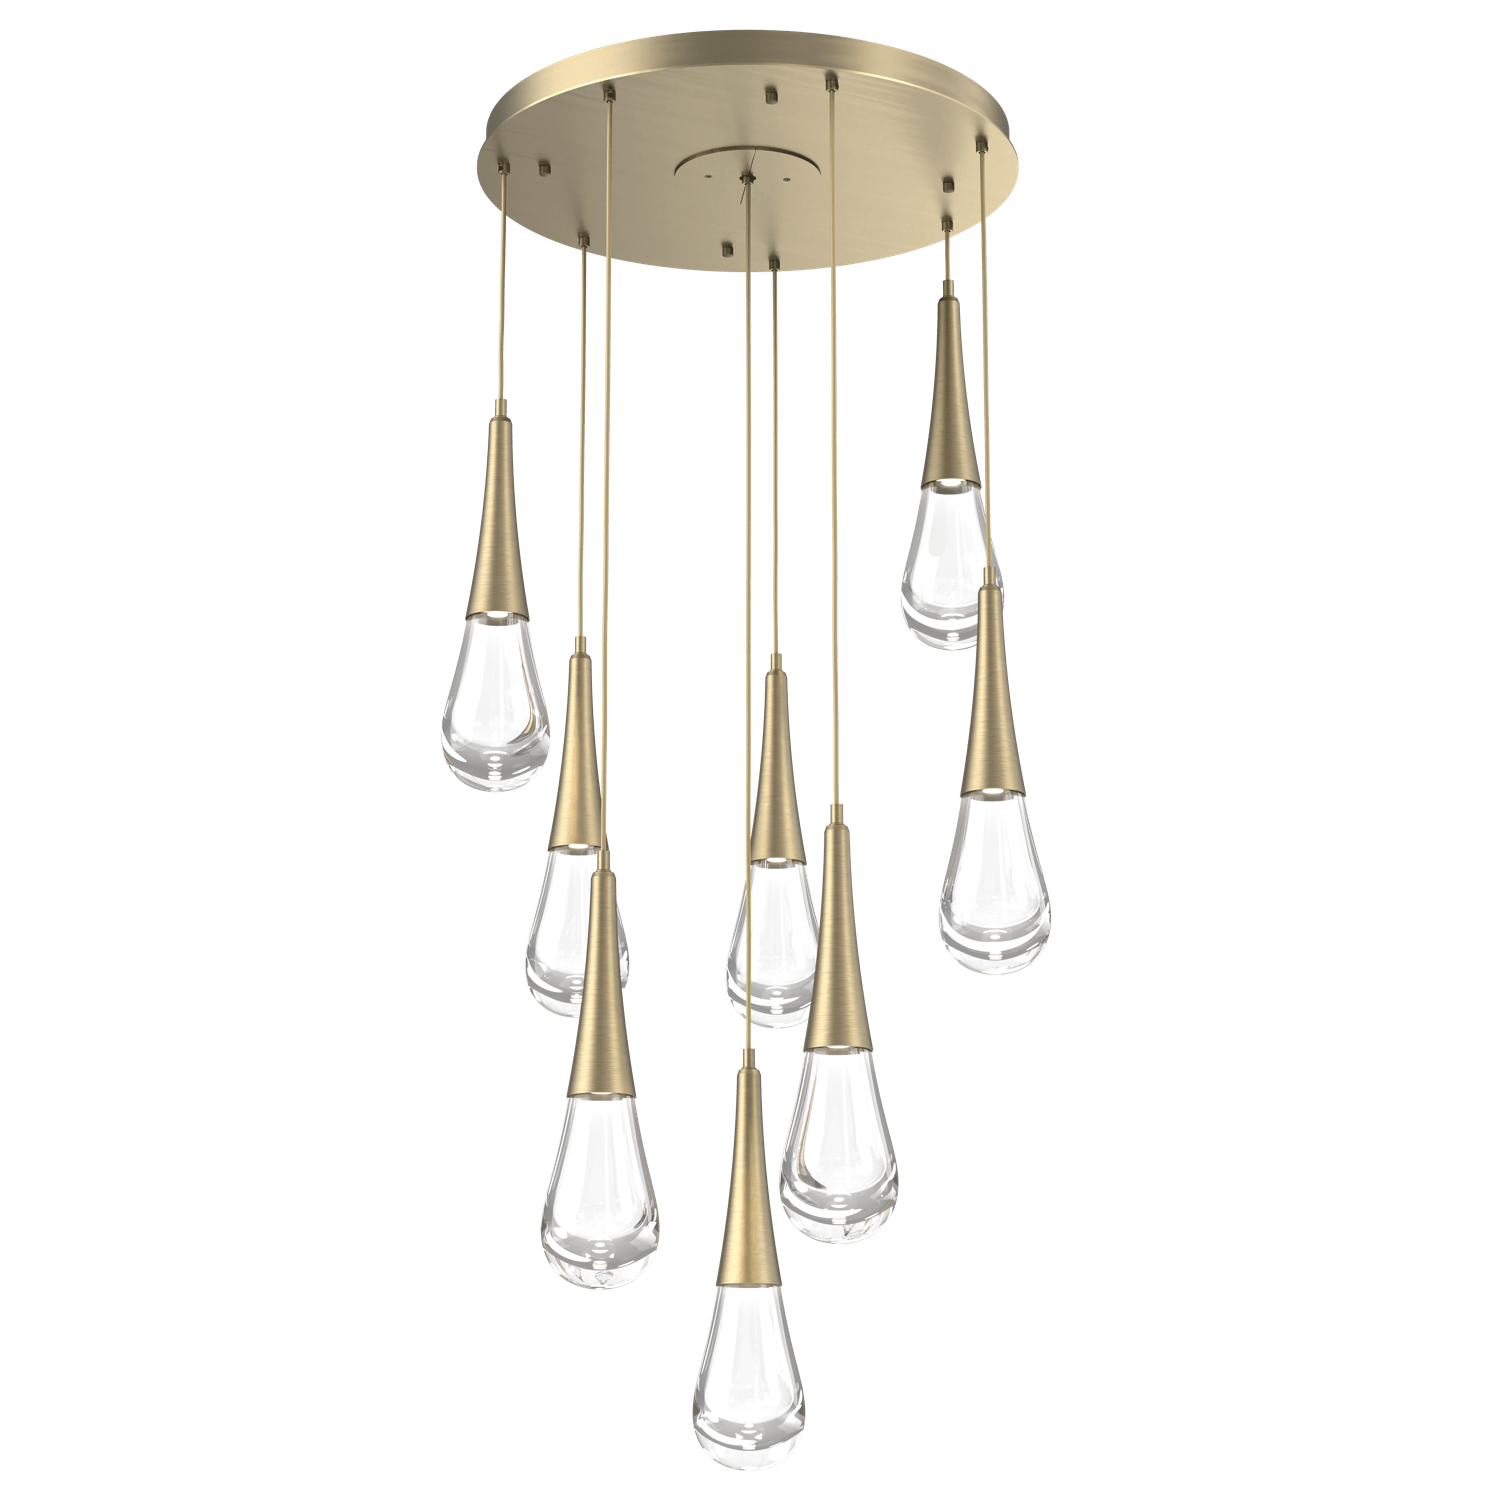 CHB0078-08-HB-Hammerton-Studio-Raindrop-8-light-round-pendant-chandelier-with-heritage-brass-finish-and-clear-blown-glass-shades-and-LED-lamping